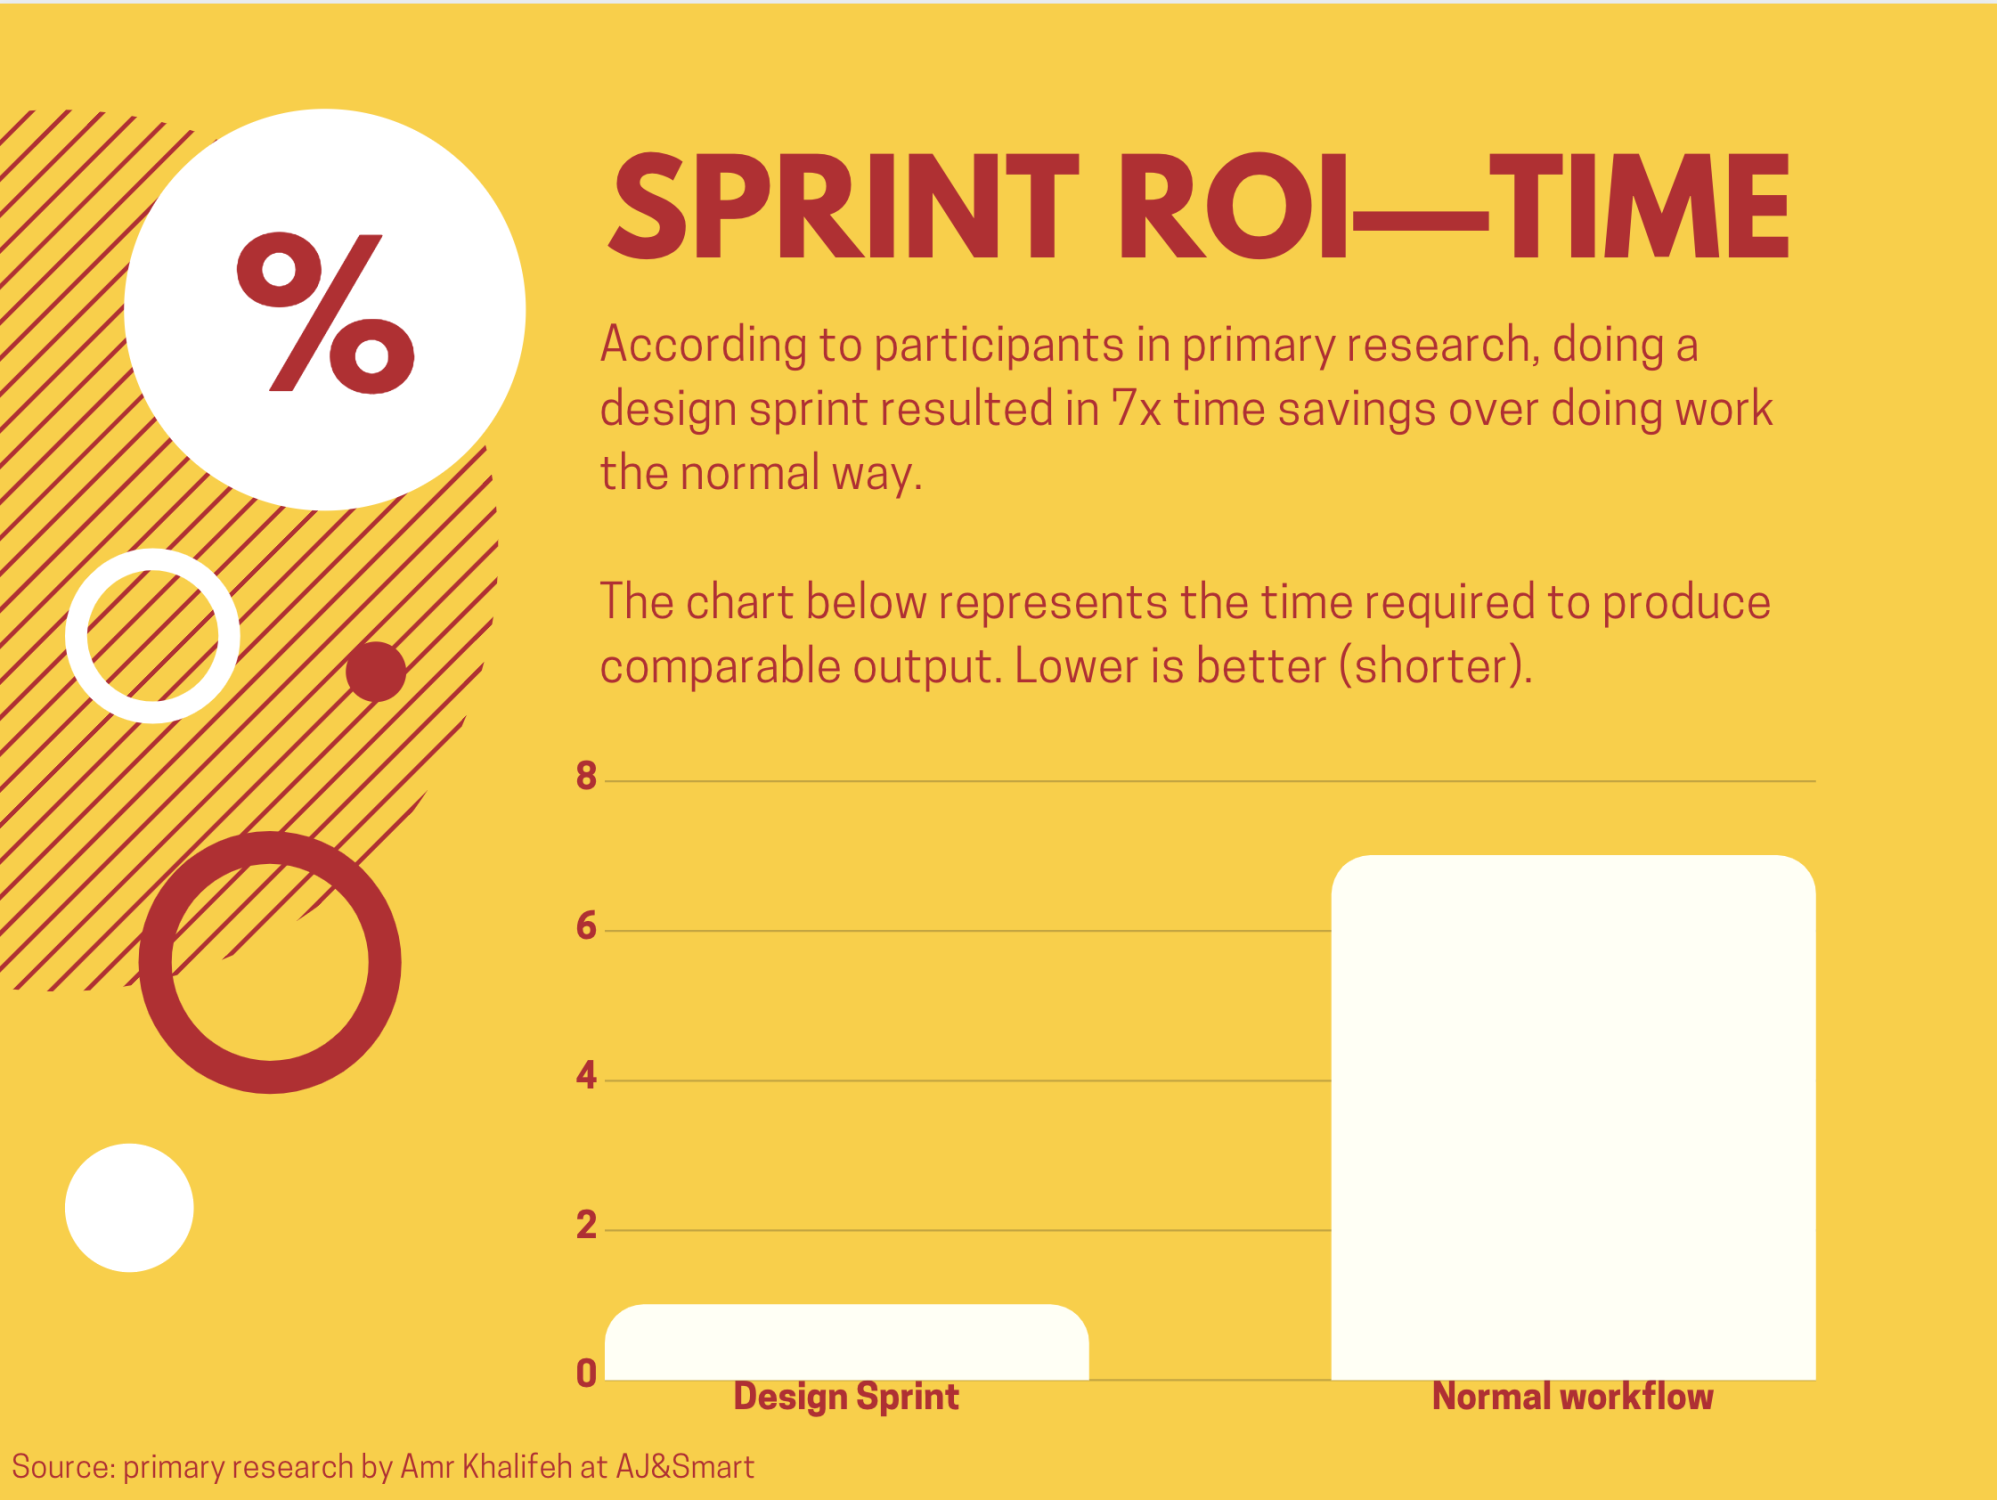 7 times faster results using a Design Sprint compared to traditional methods